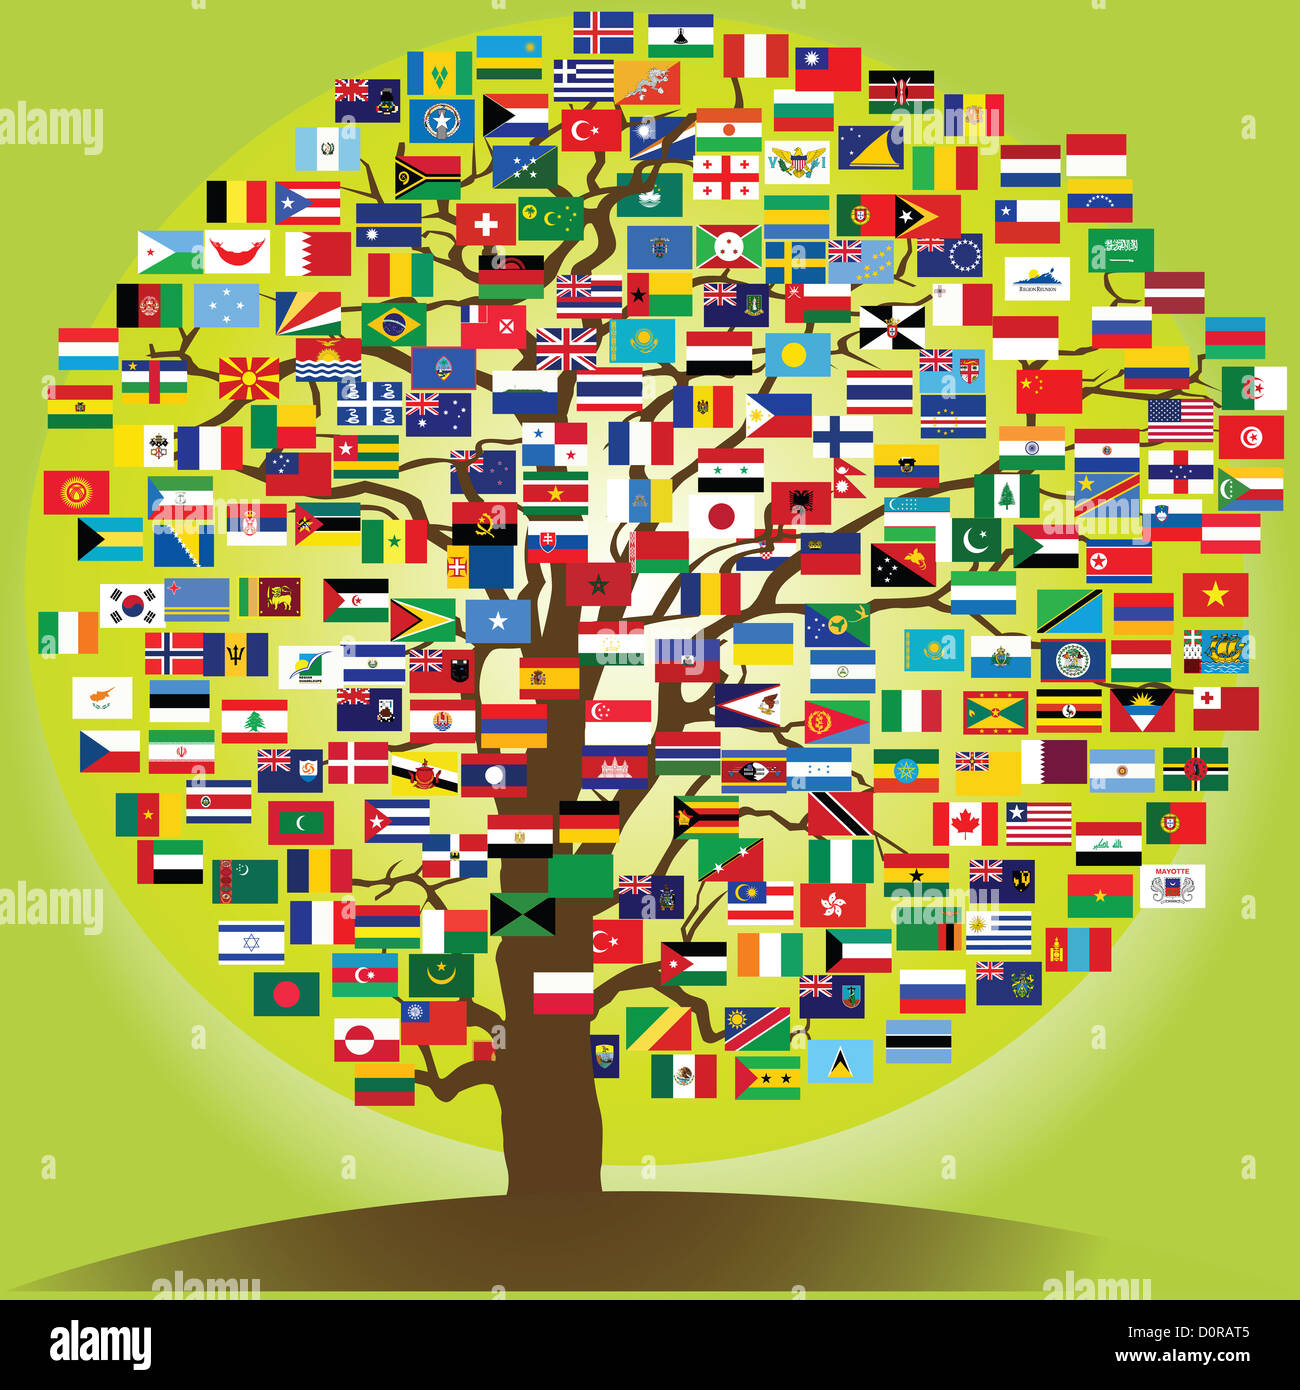 peace tree symbol of the frienship between nations Stock Photo